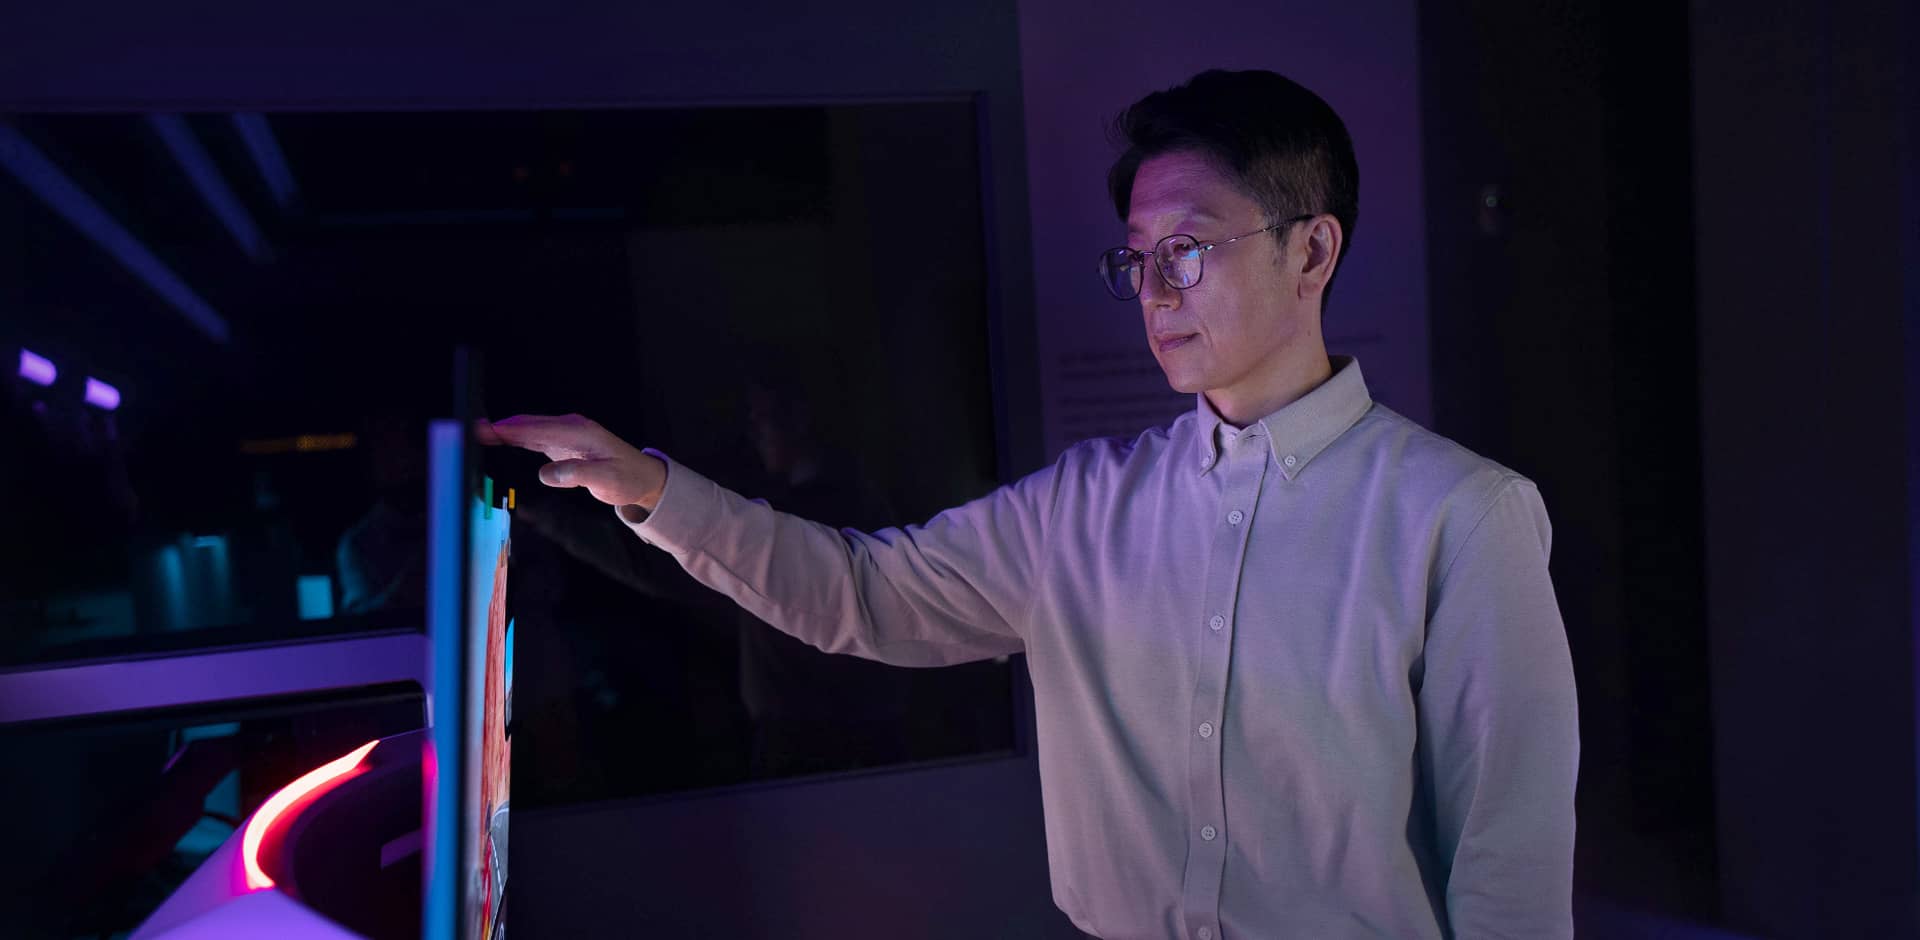 Dr. Yoo is touching Bendable Gaming OLED screen.